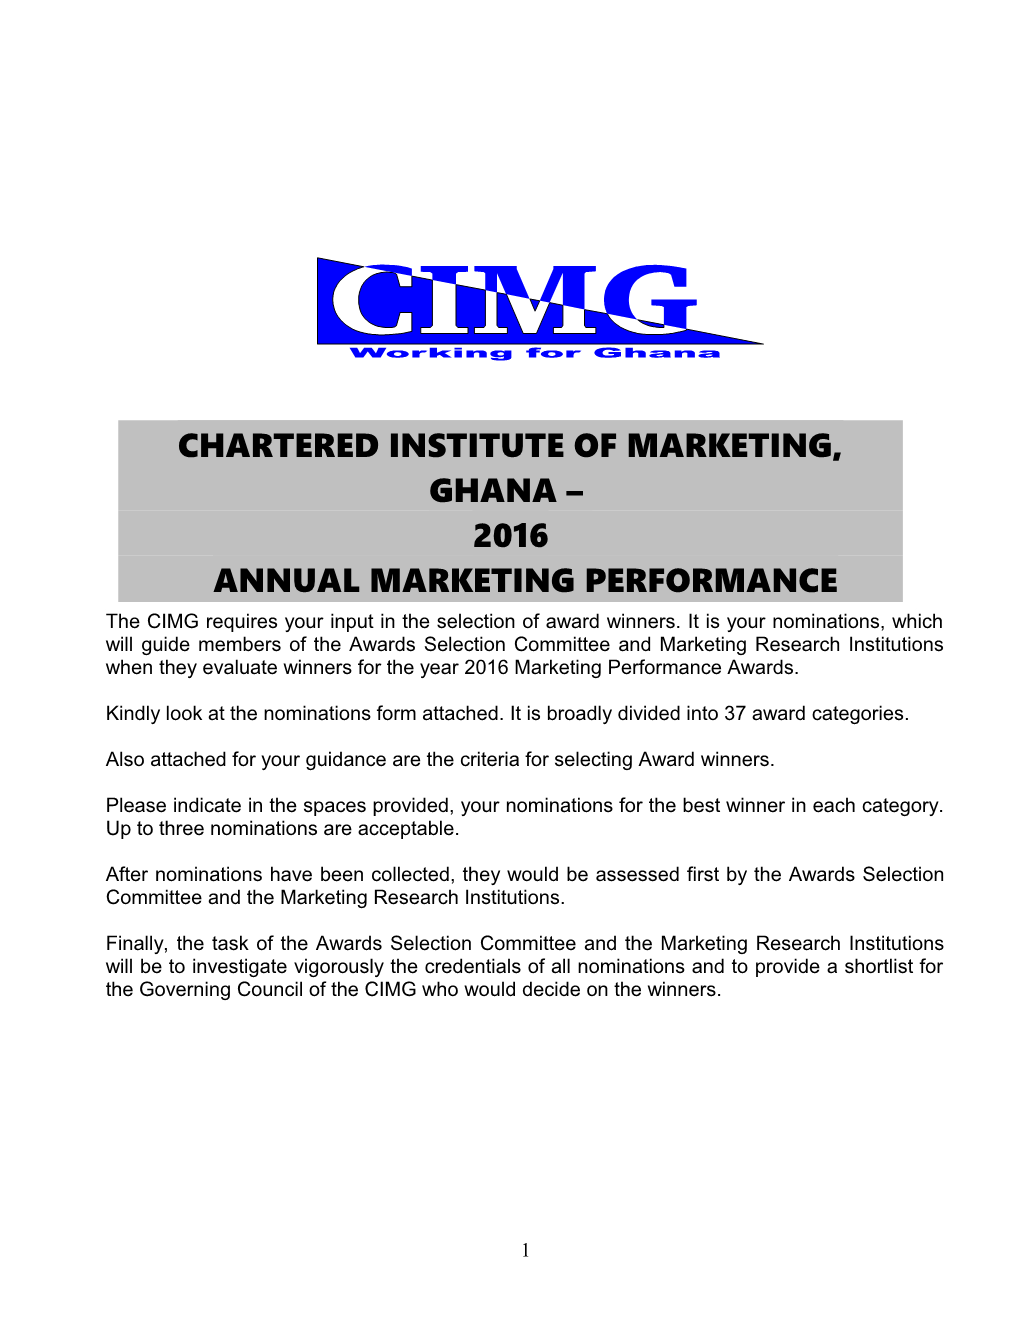 Chartered Institute of Marketing Ghan 2001